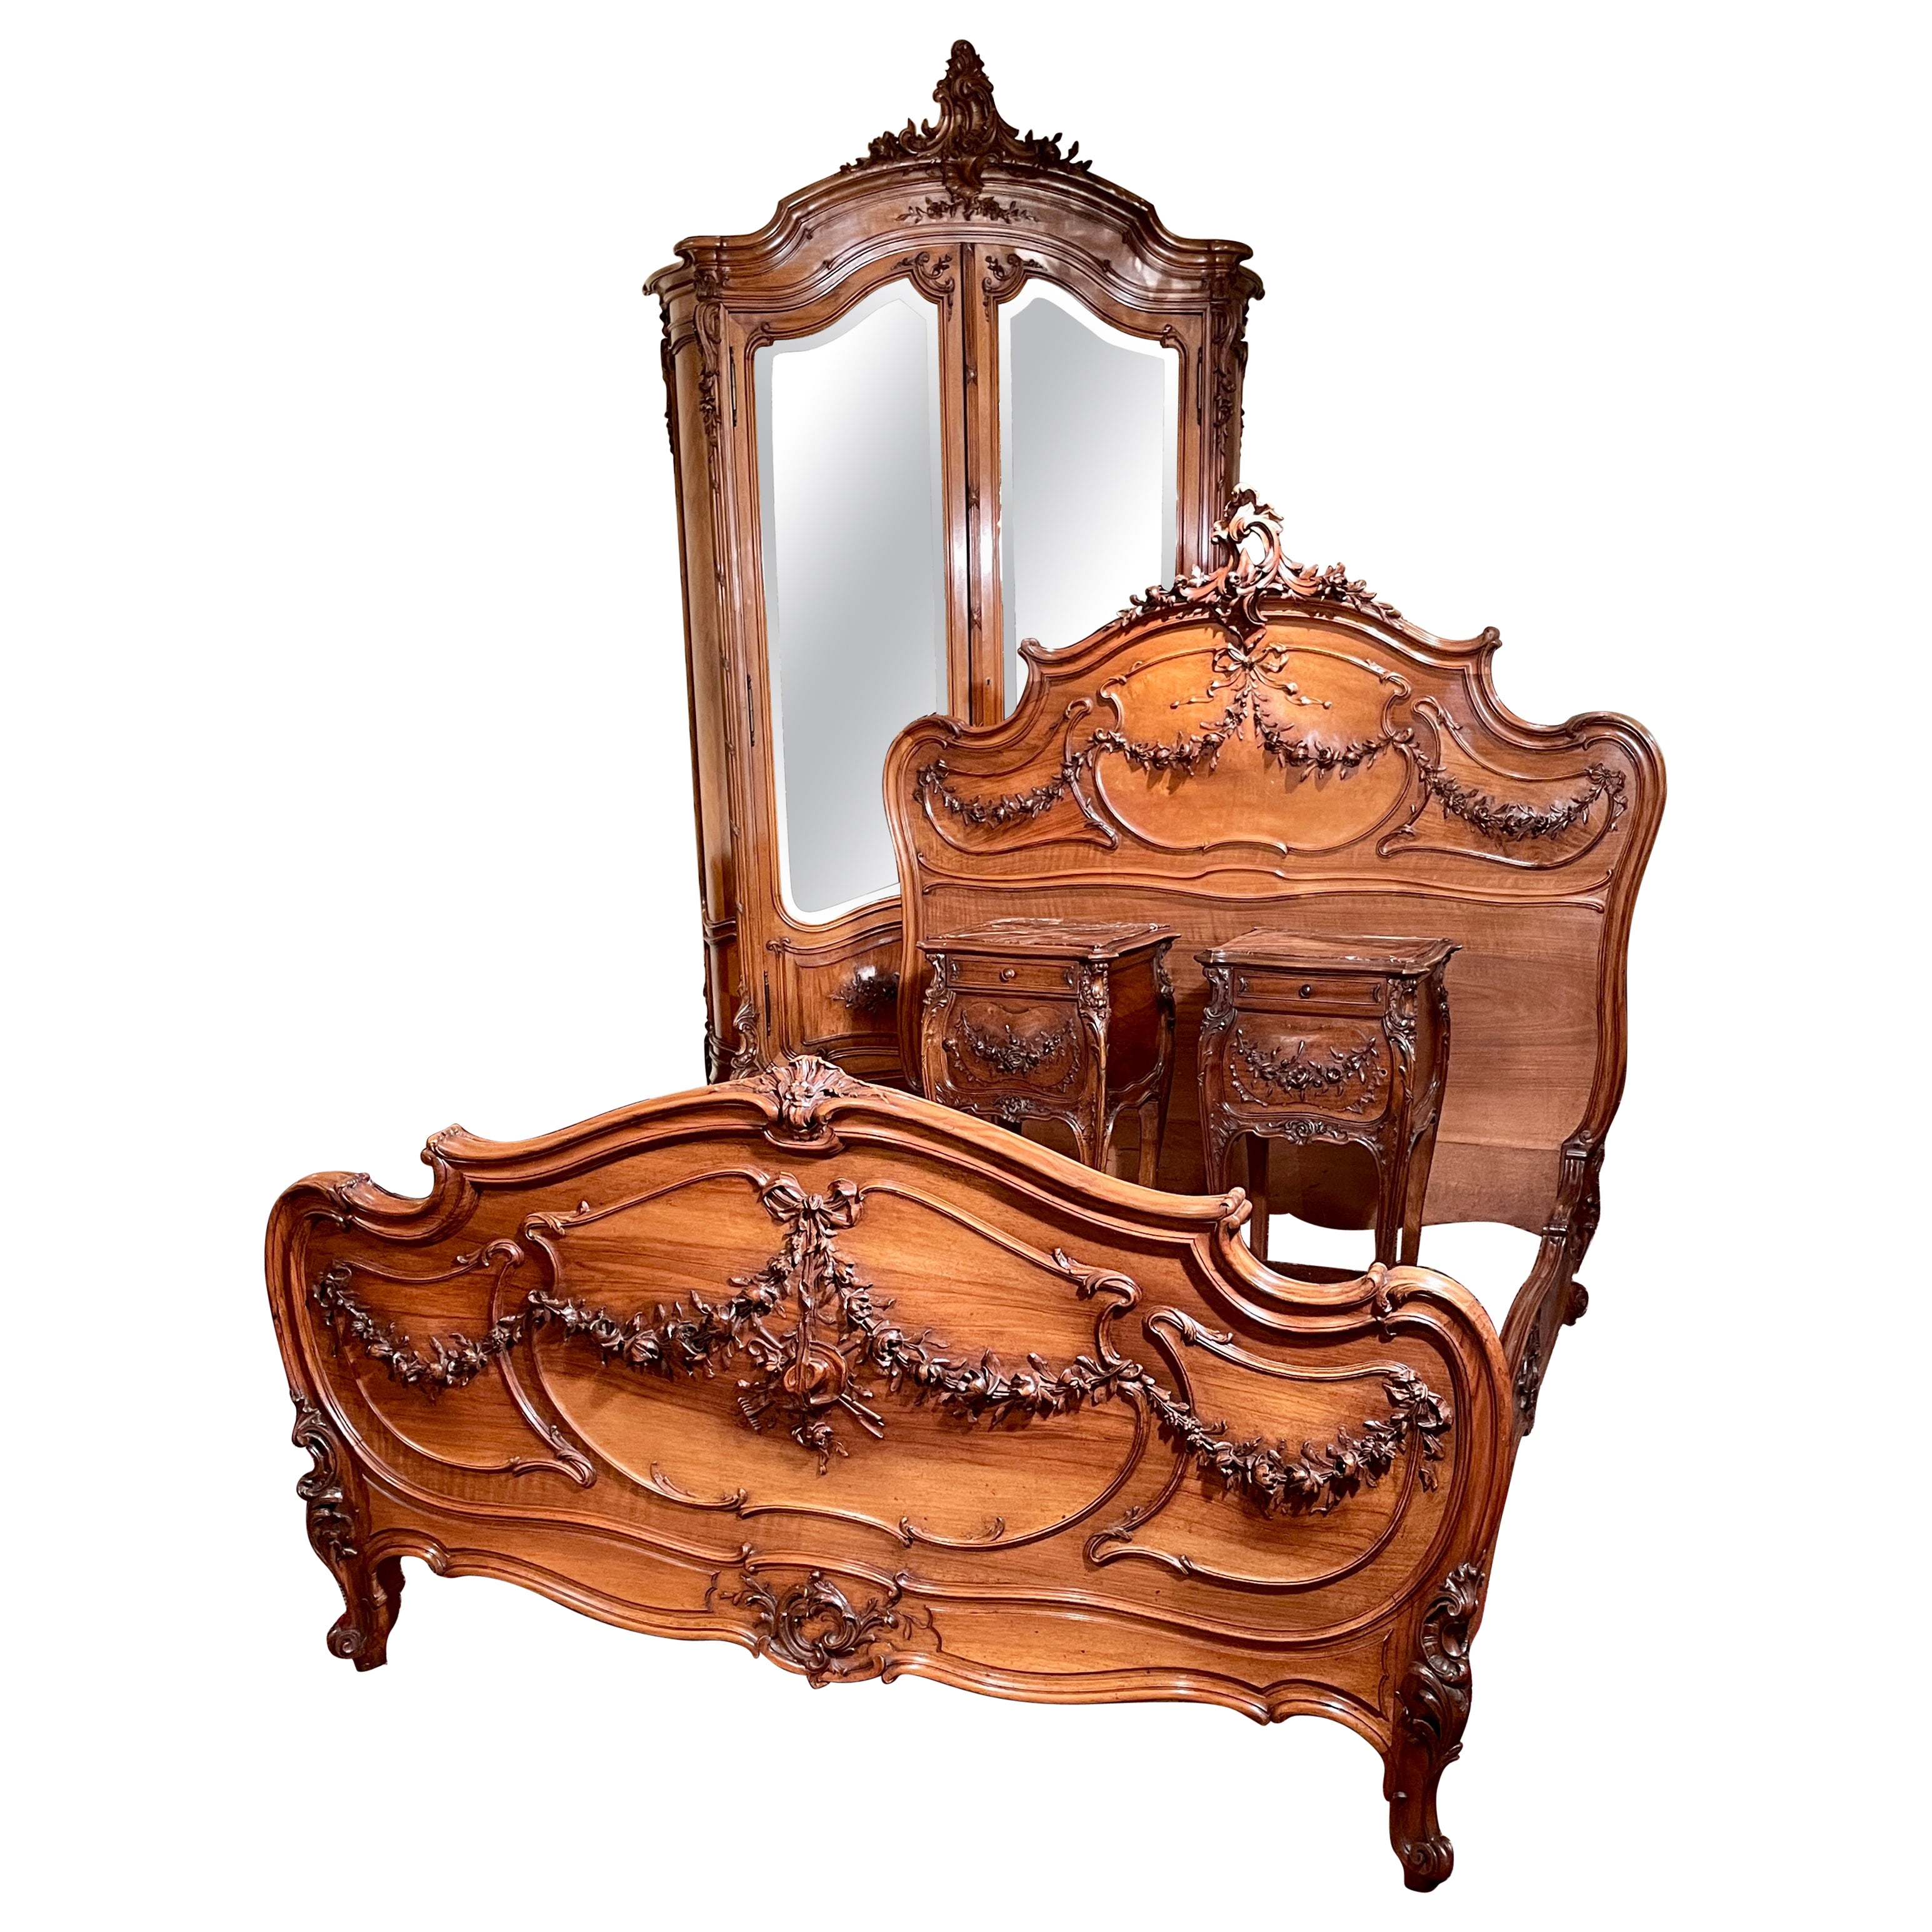 Antique French Louis XV Carved Walnut Bedroom Suite Signed "F. Schmit